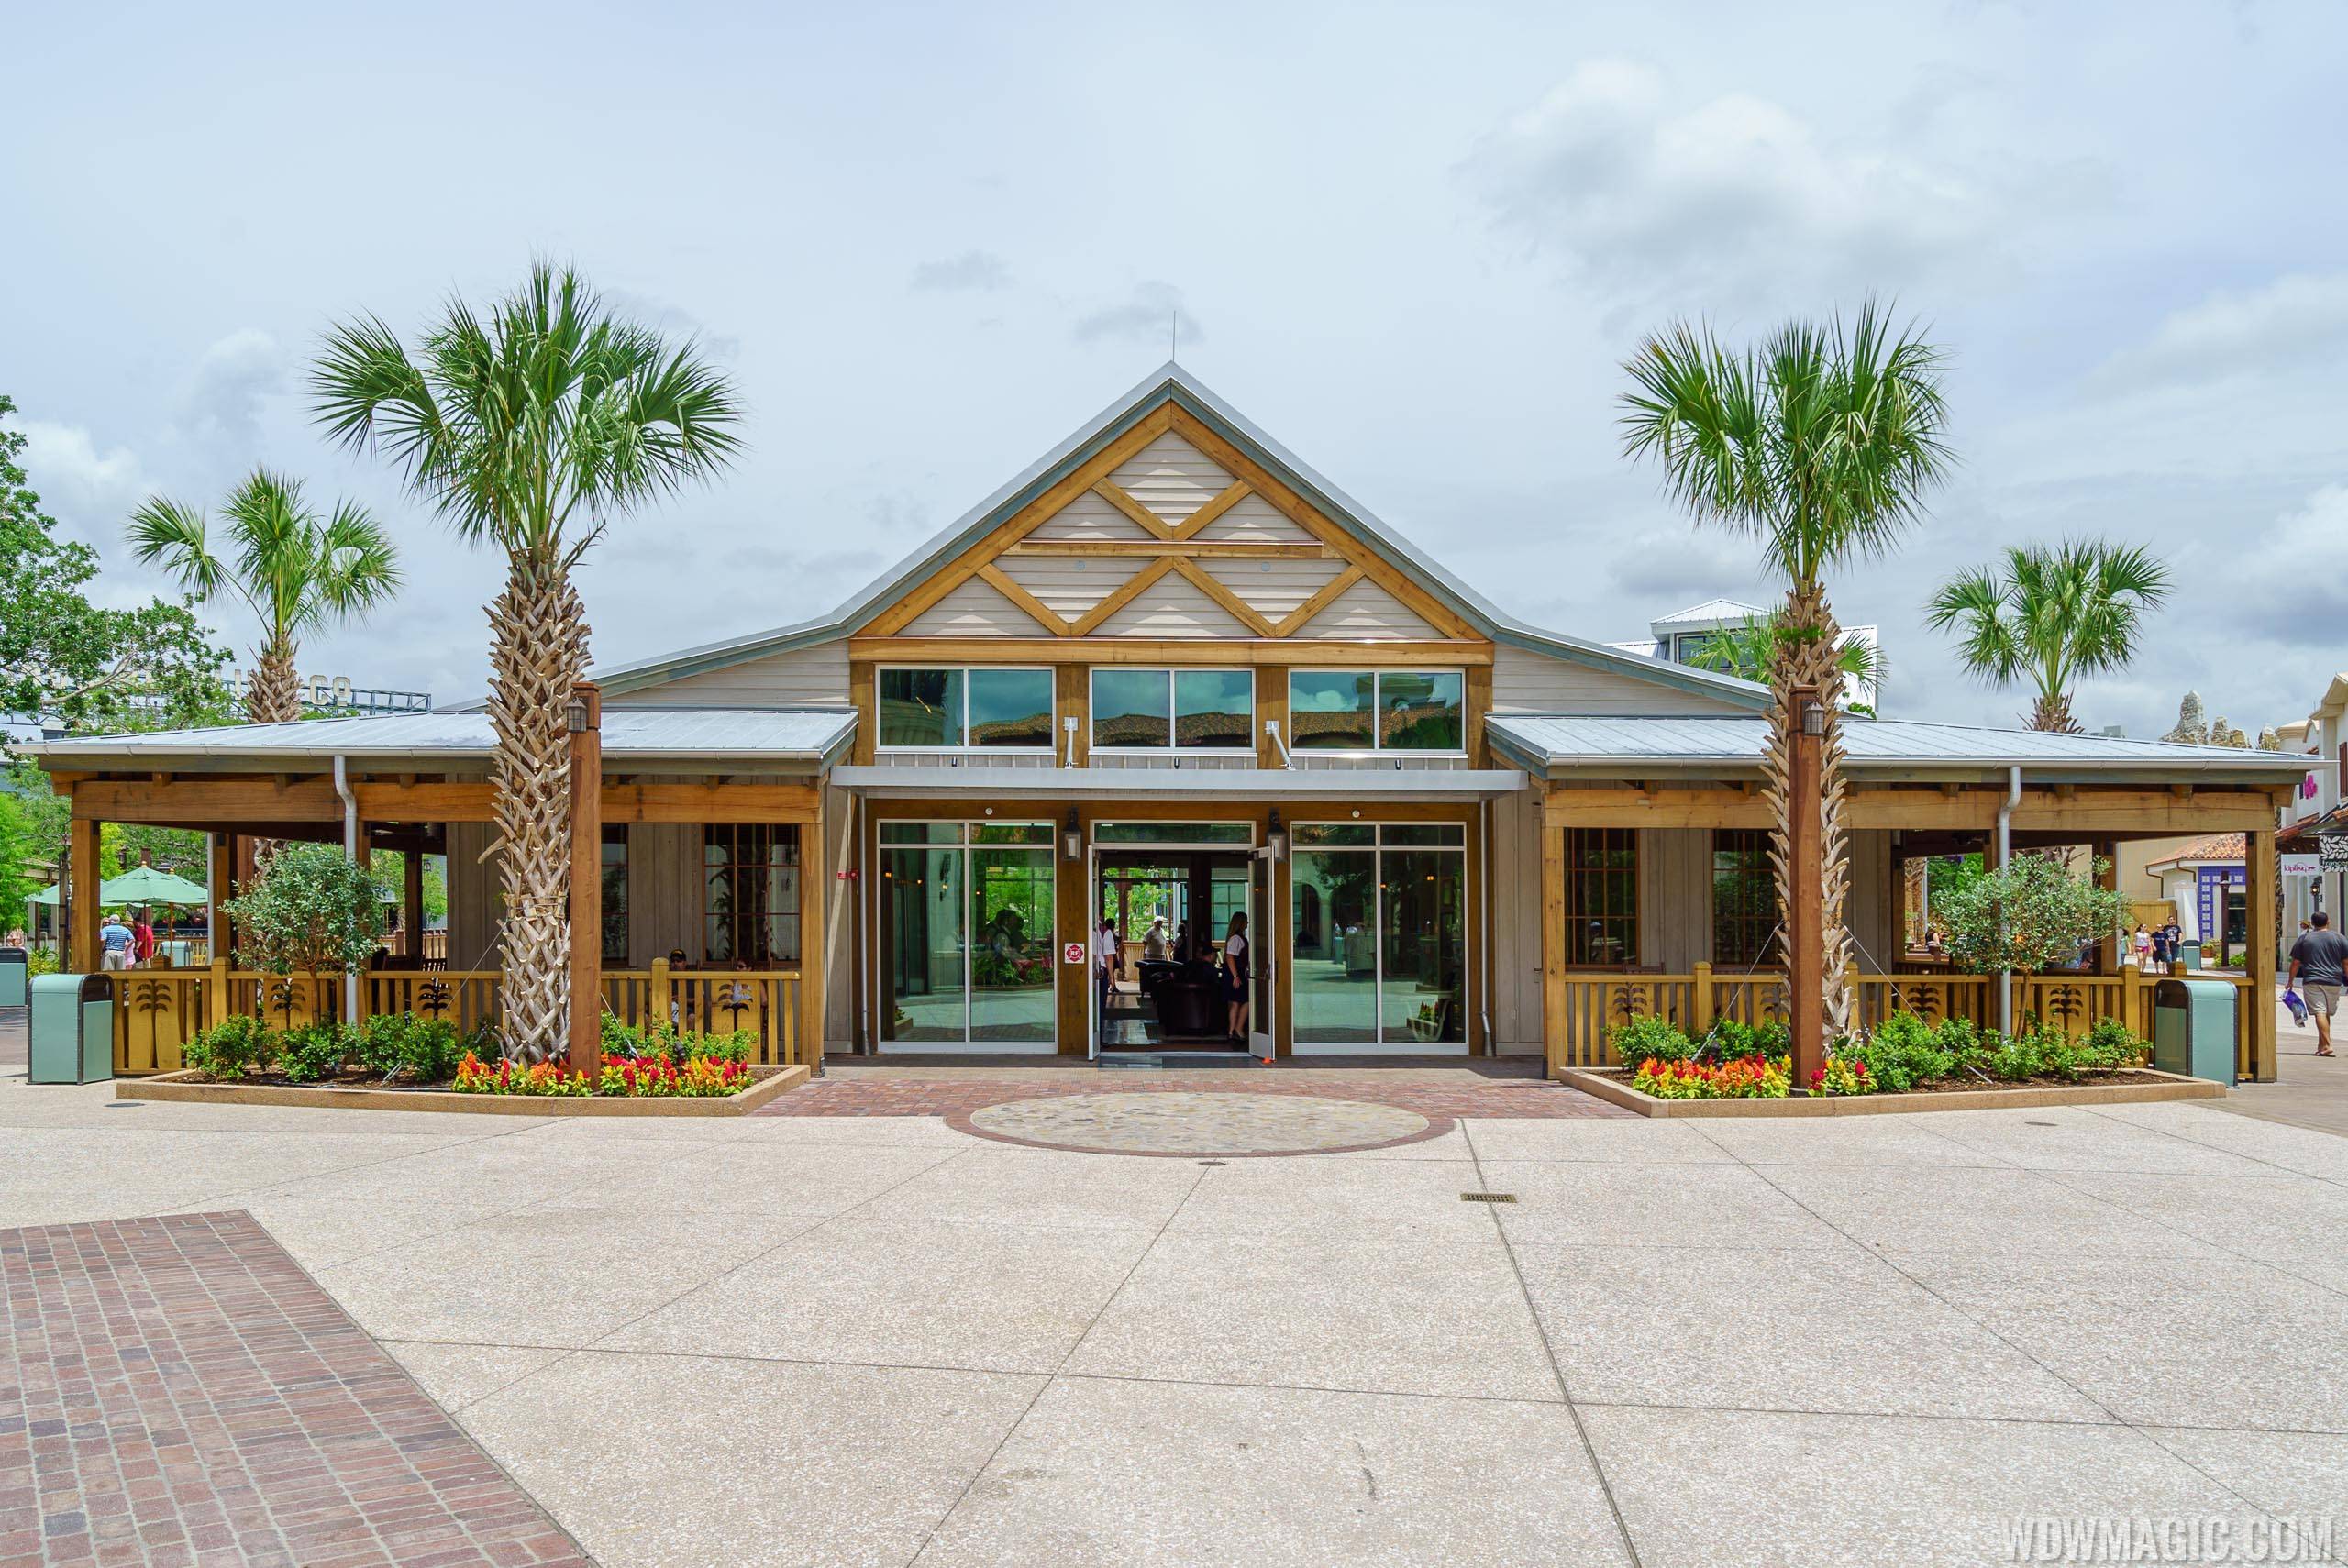 New Disney Springs guest relations in Town Center Welcome Center